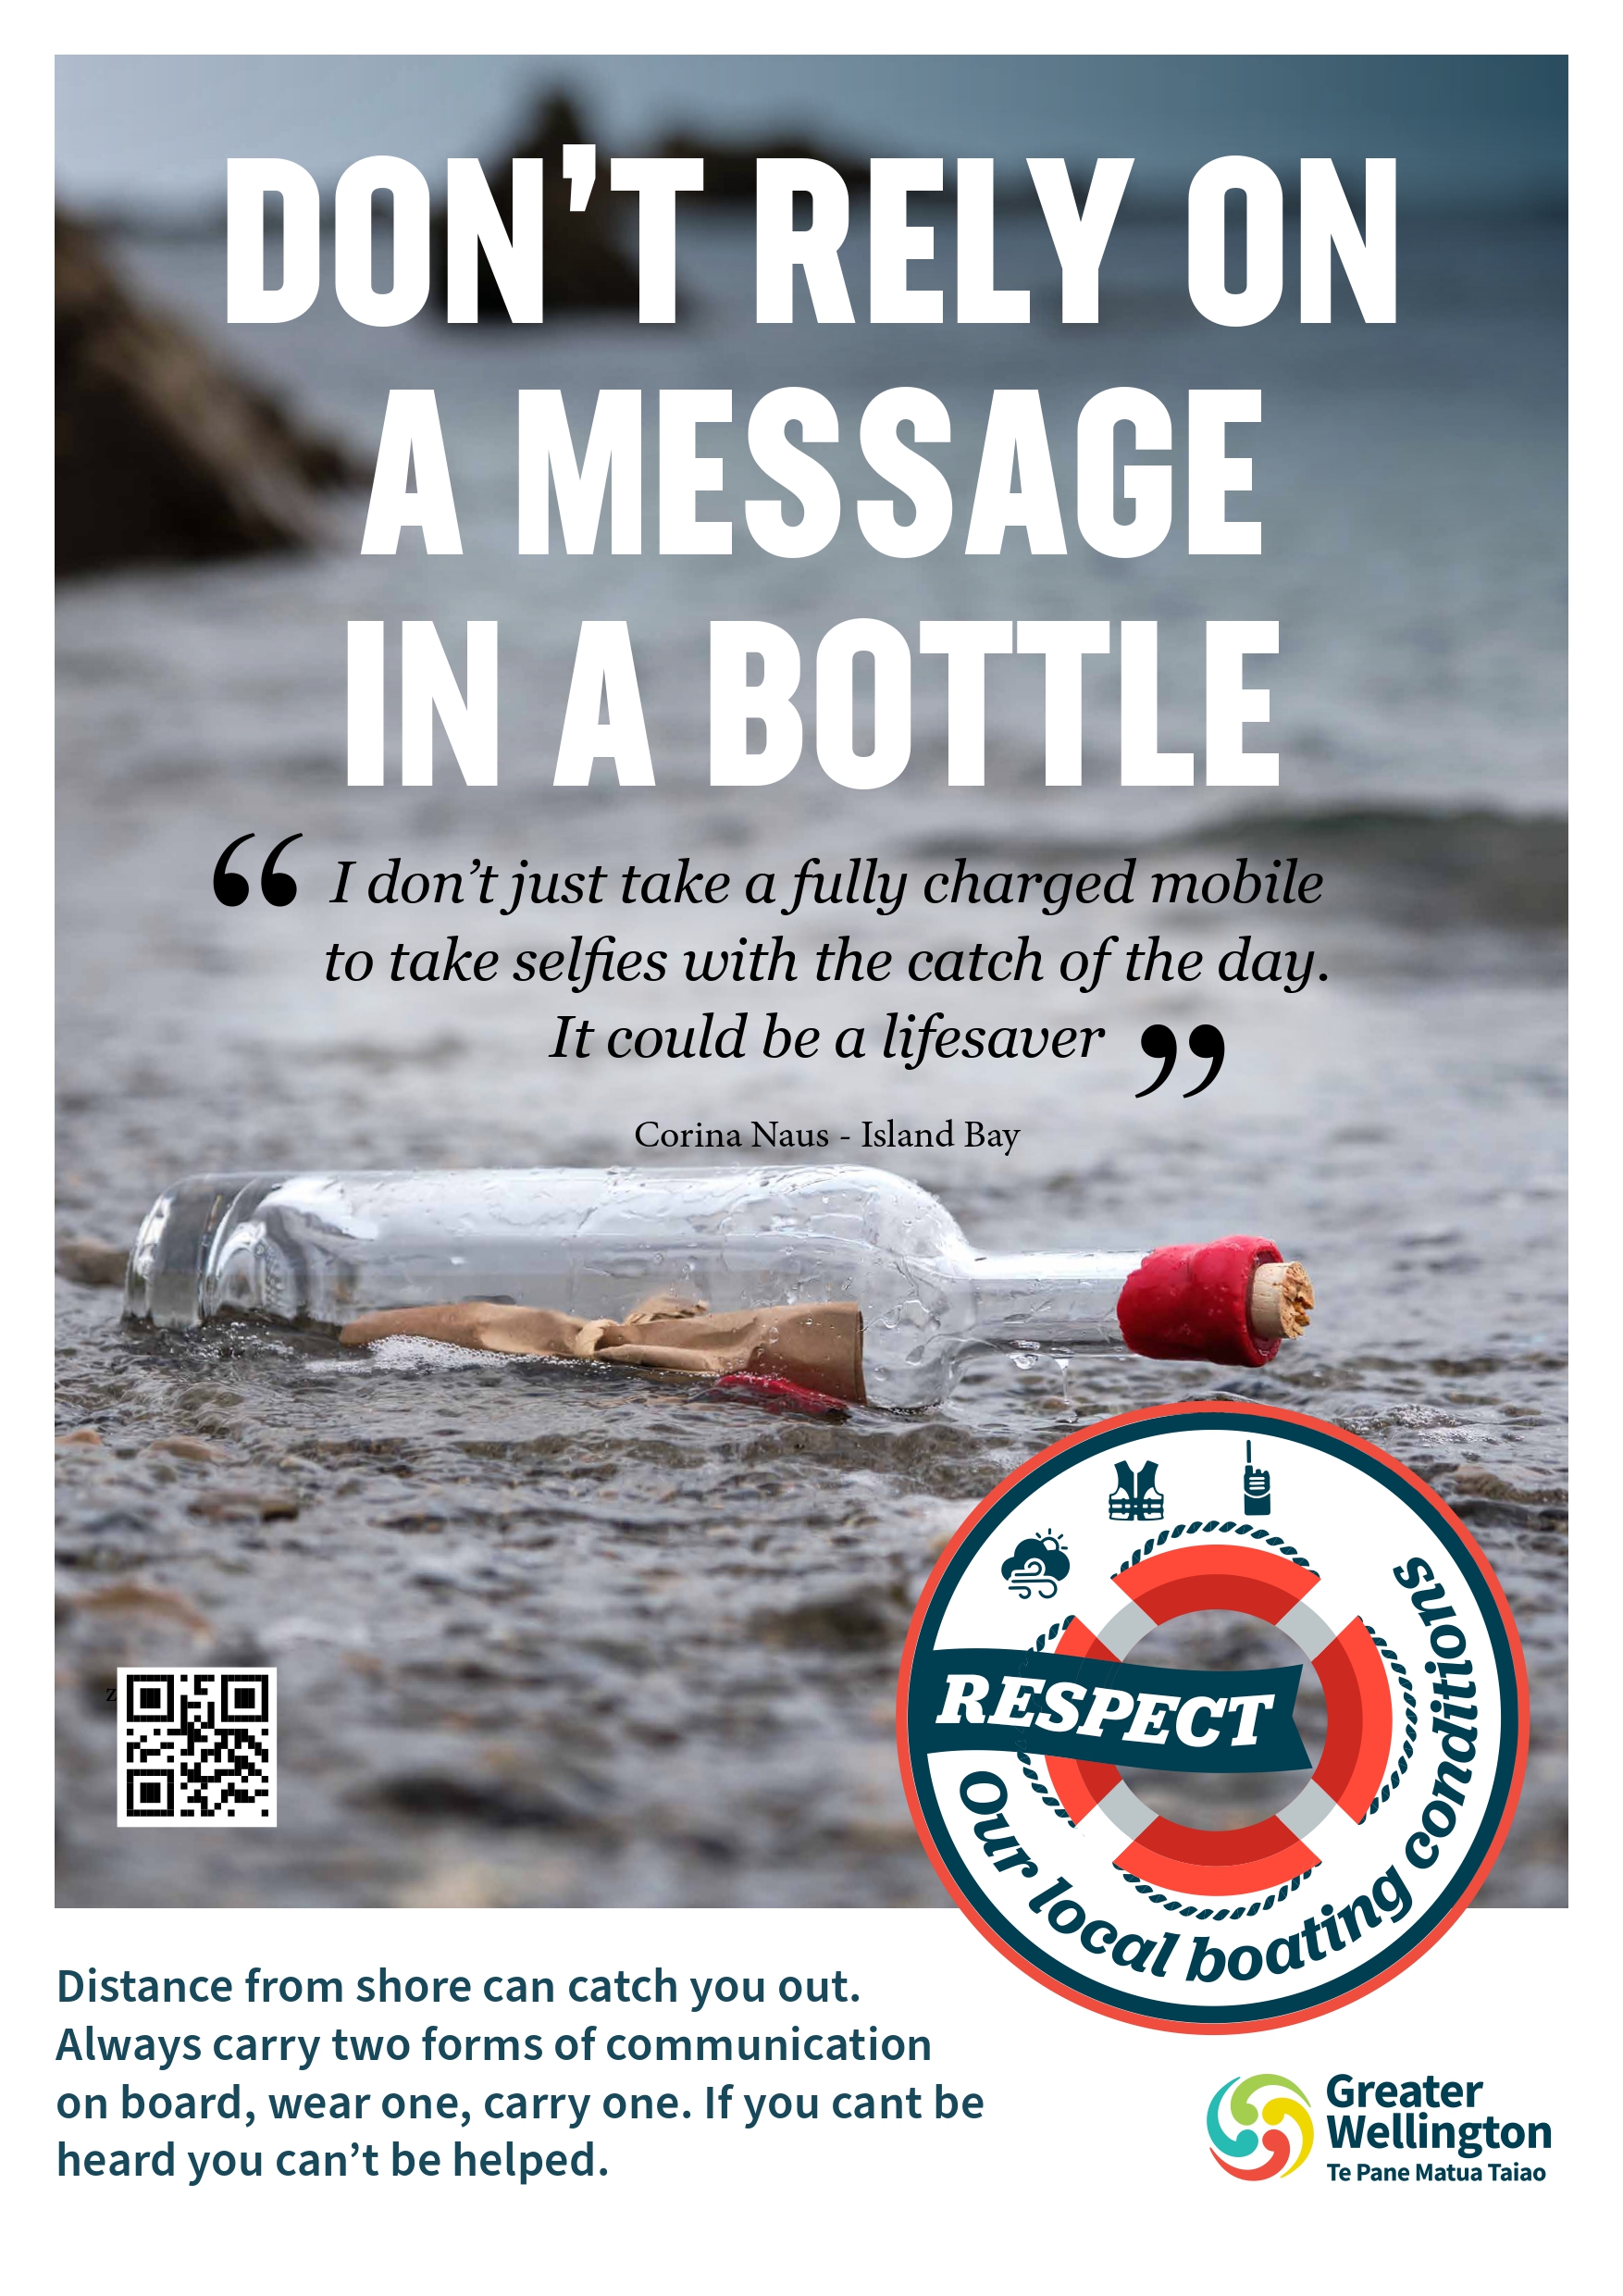 Don't rely on a message in a bottle